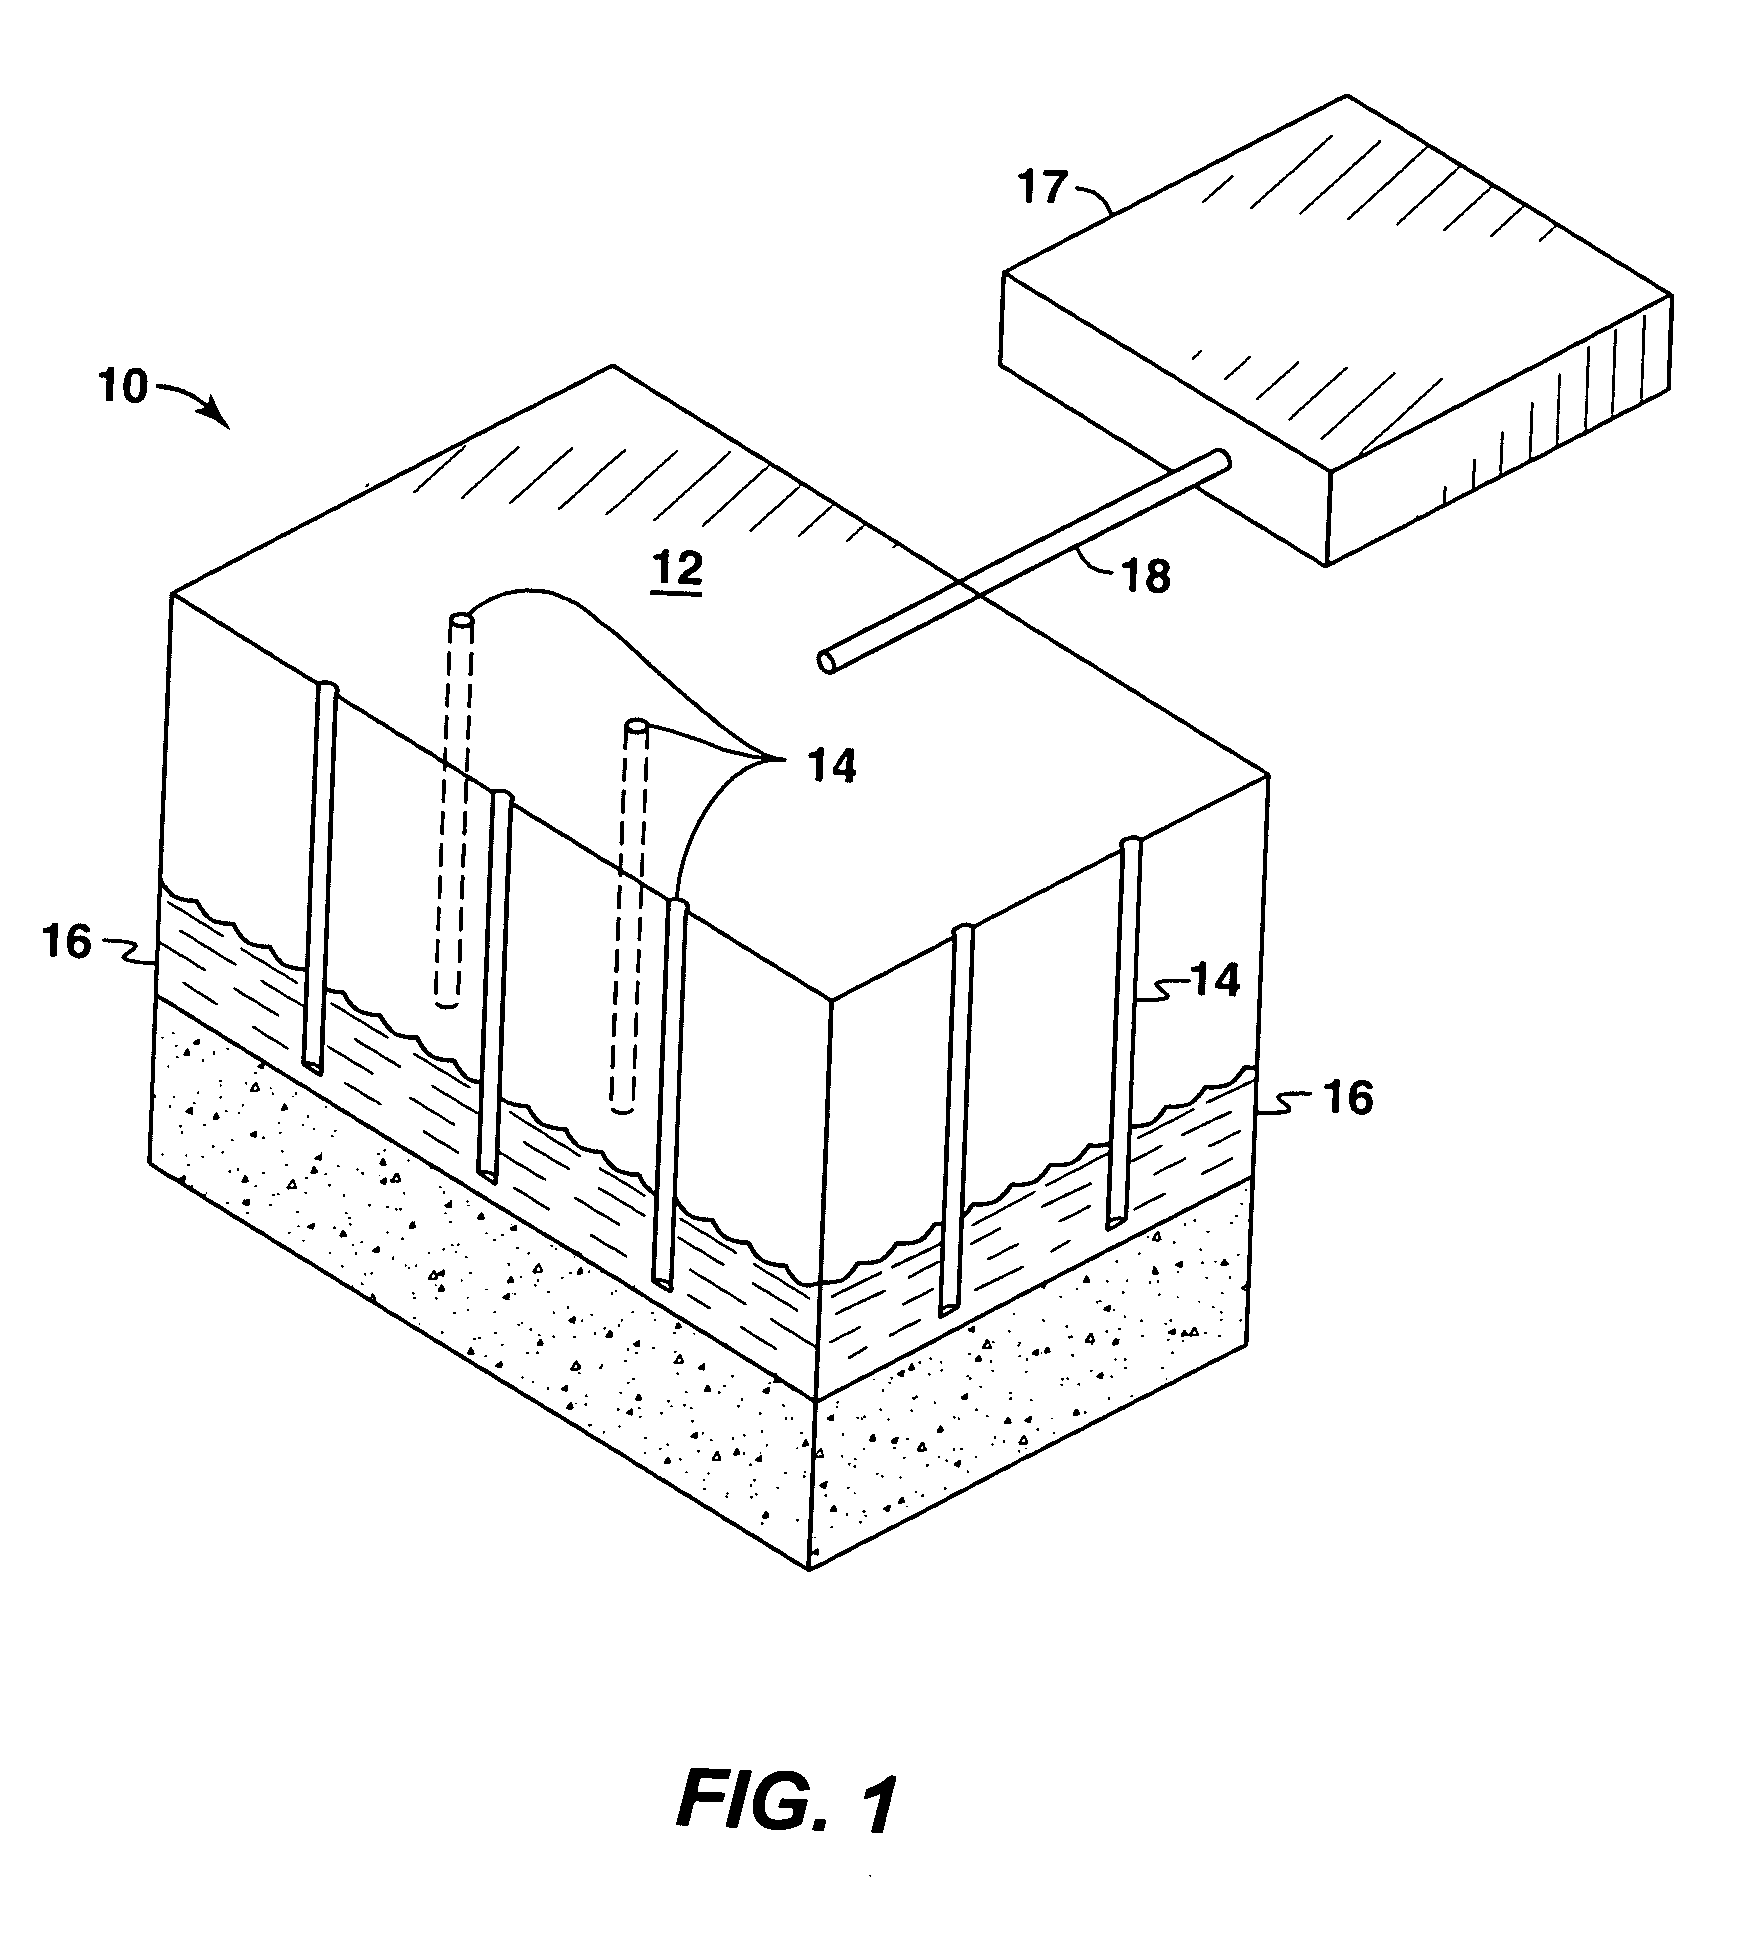 Process for producing Hydrocarbon fluids combining in situ heating, a power plant and a gas plant